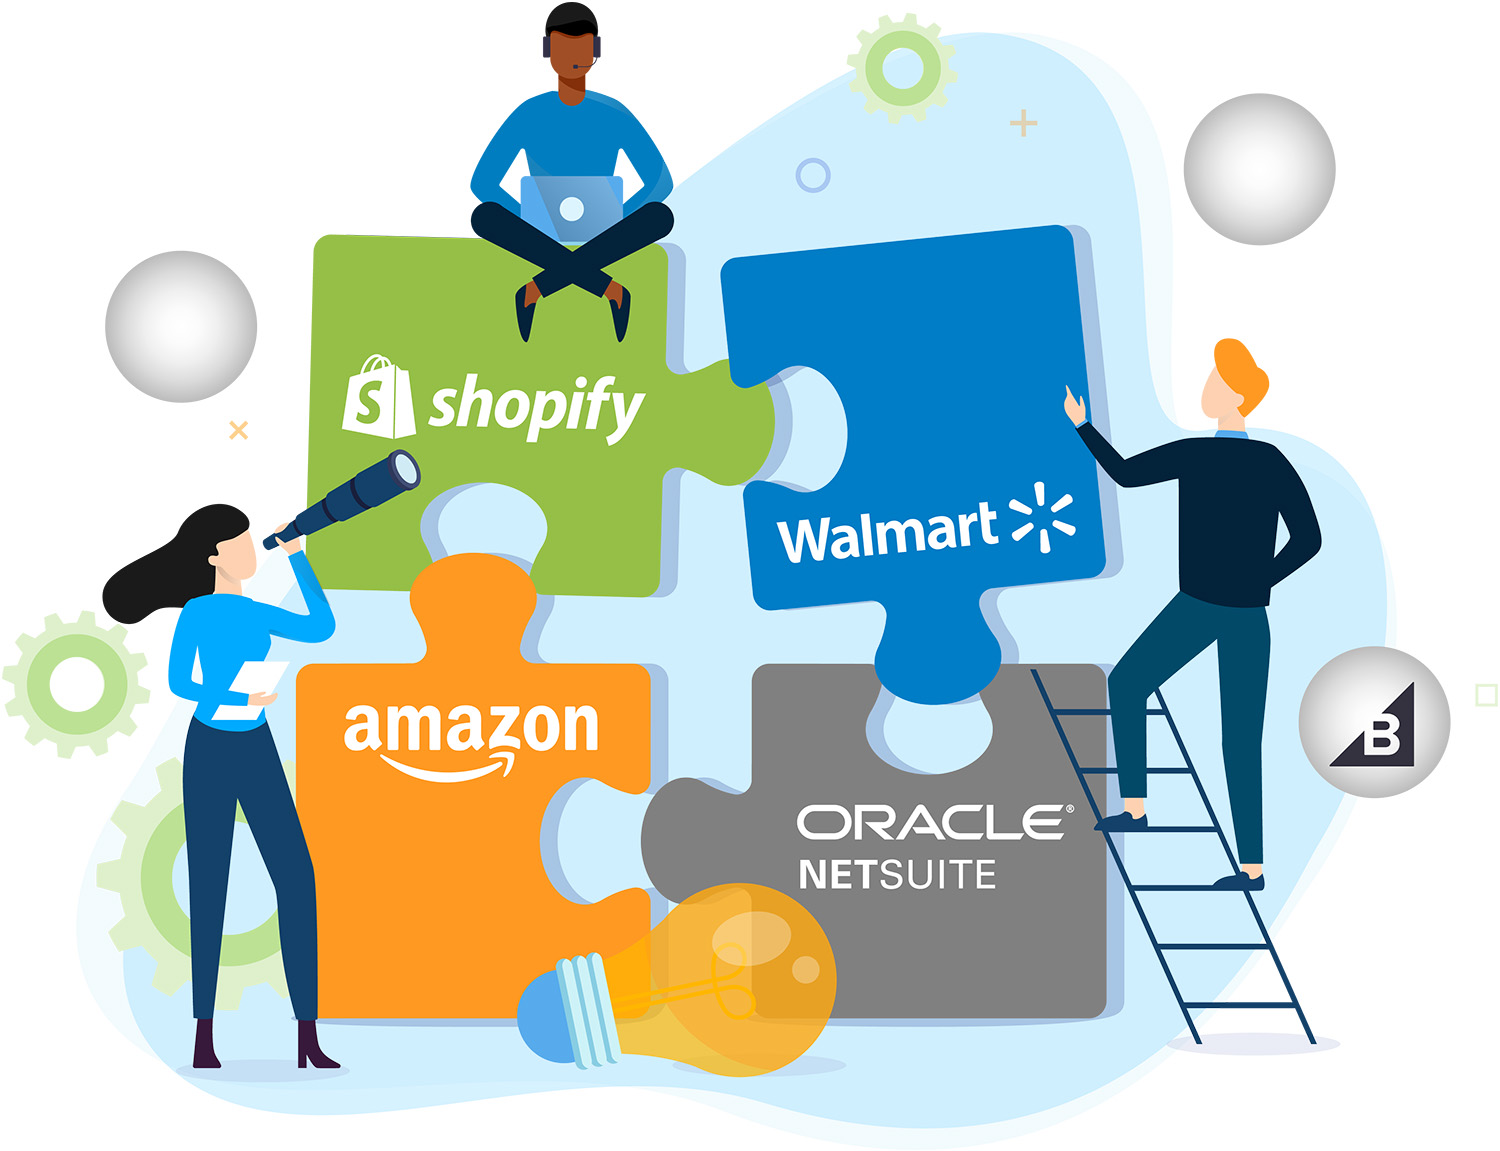 shipping integration for shopify, walmart, amazon, and oracle netsuite represented by puzzle pieces with the company logos